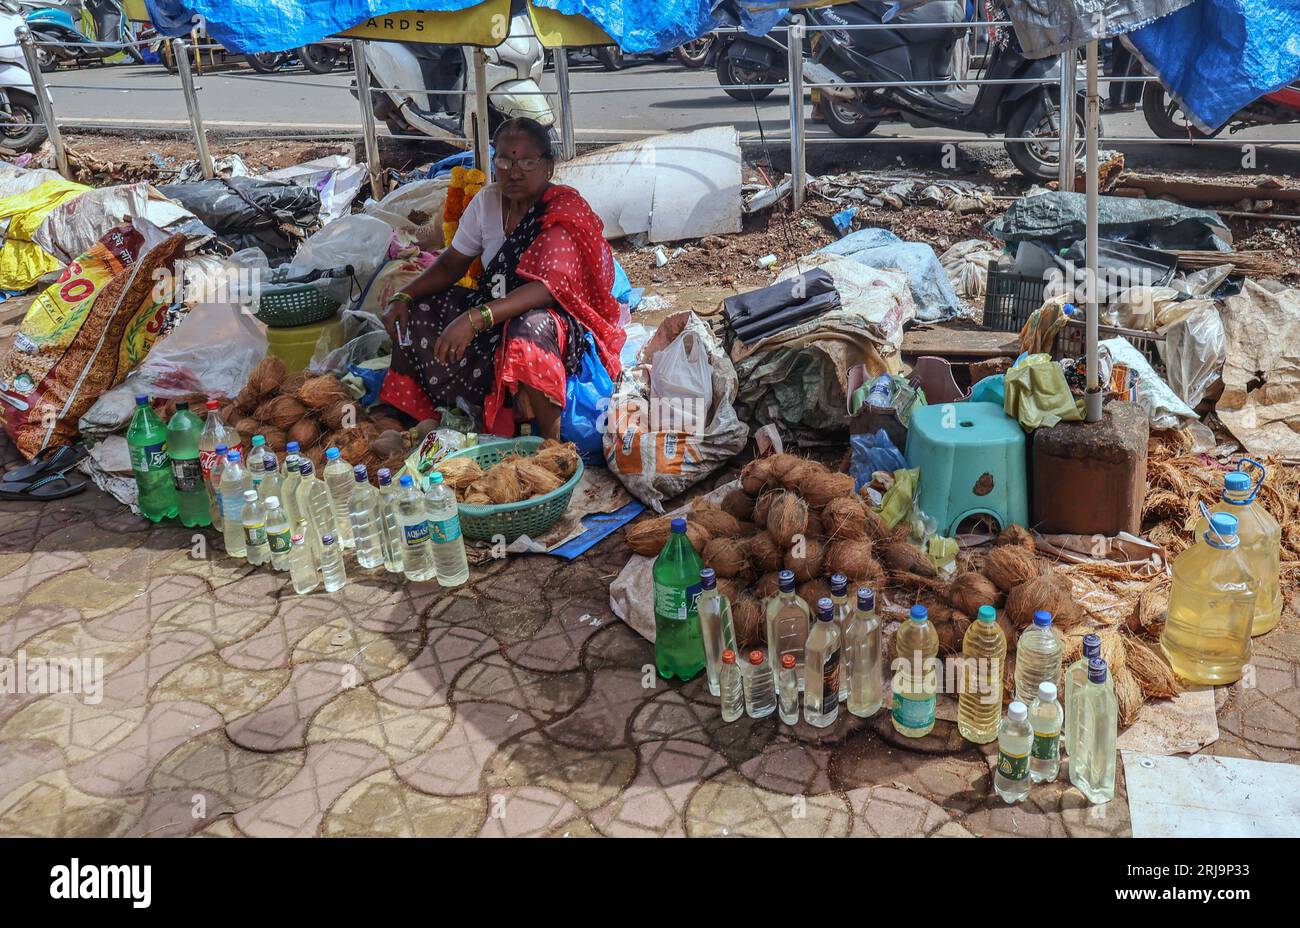 Margao, South Goa, India. 22nd Aug, 2023. Cocunut Oil for sale in the Narrow passage ways selling anything imaginable in the busy and colourful market at the city of Margao, South India.Paul Quezada-Neiman/Alamy Live News Credit: Paul Quezada-Neiman/Alamy Live News Stock Photo